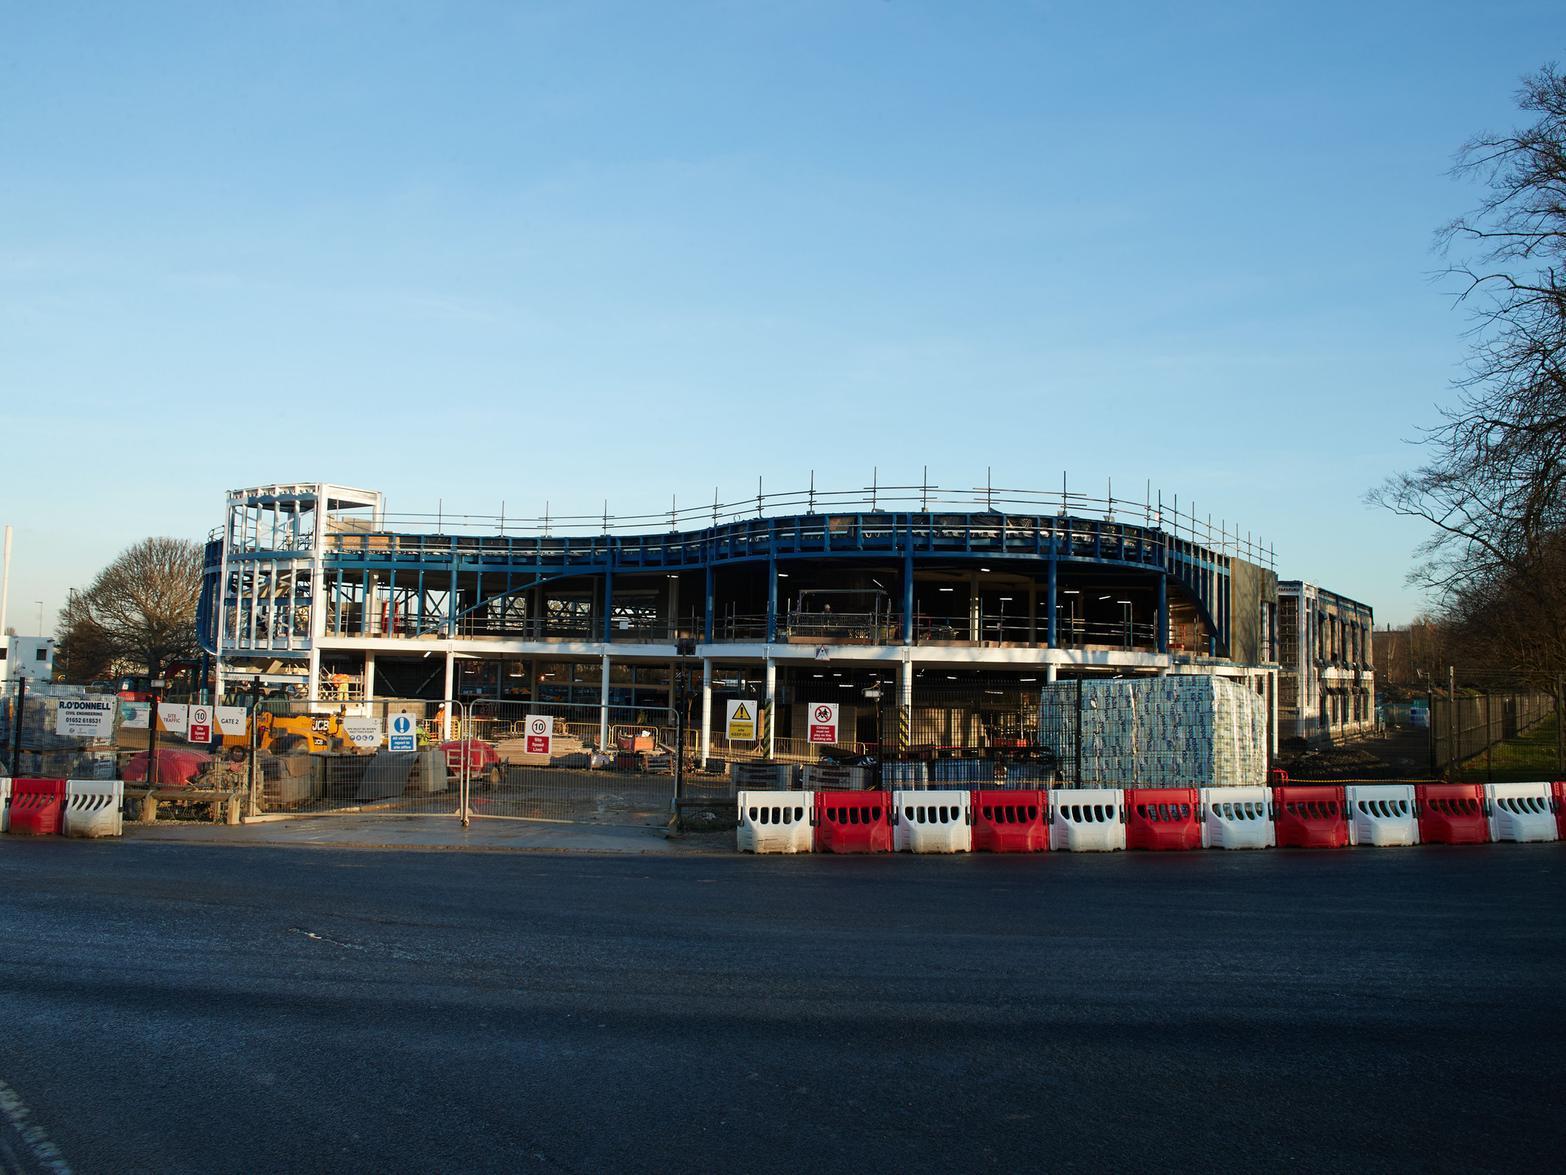 By January 2020, the building had really begun to take shape, with the roof completed and walls in process.